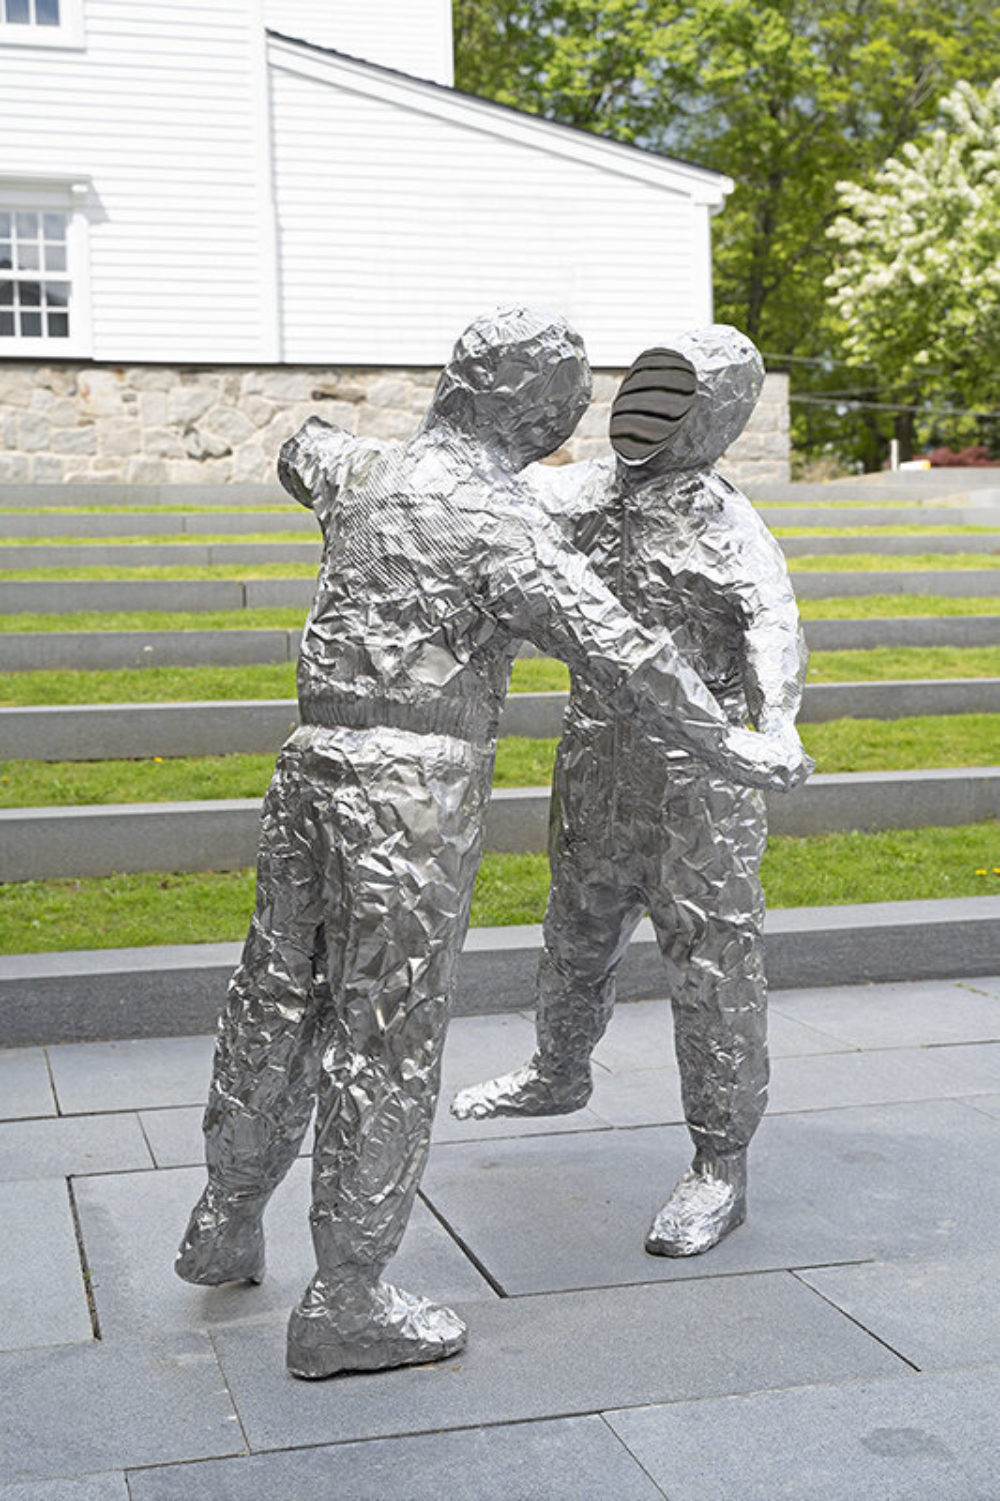 Two figures made out of crumpled baking pans cast in polished stainless steel